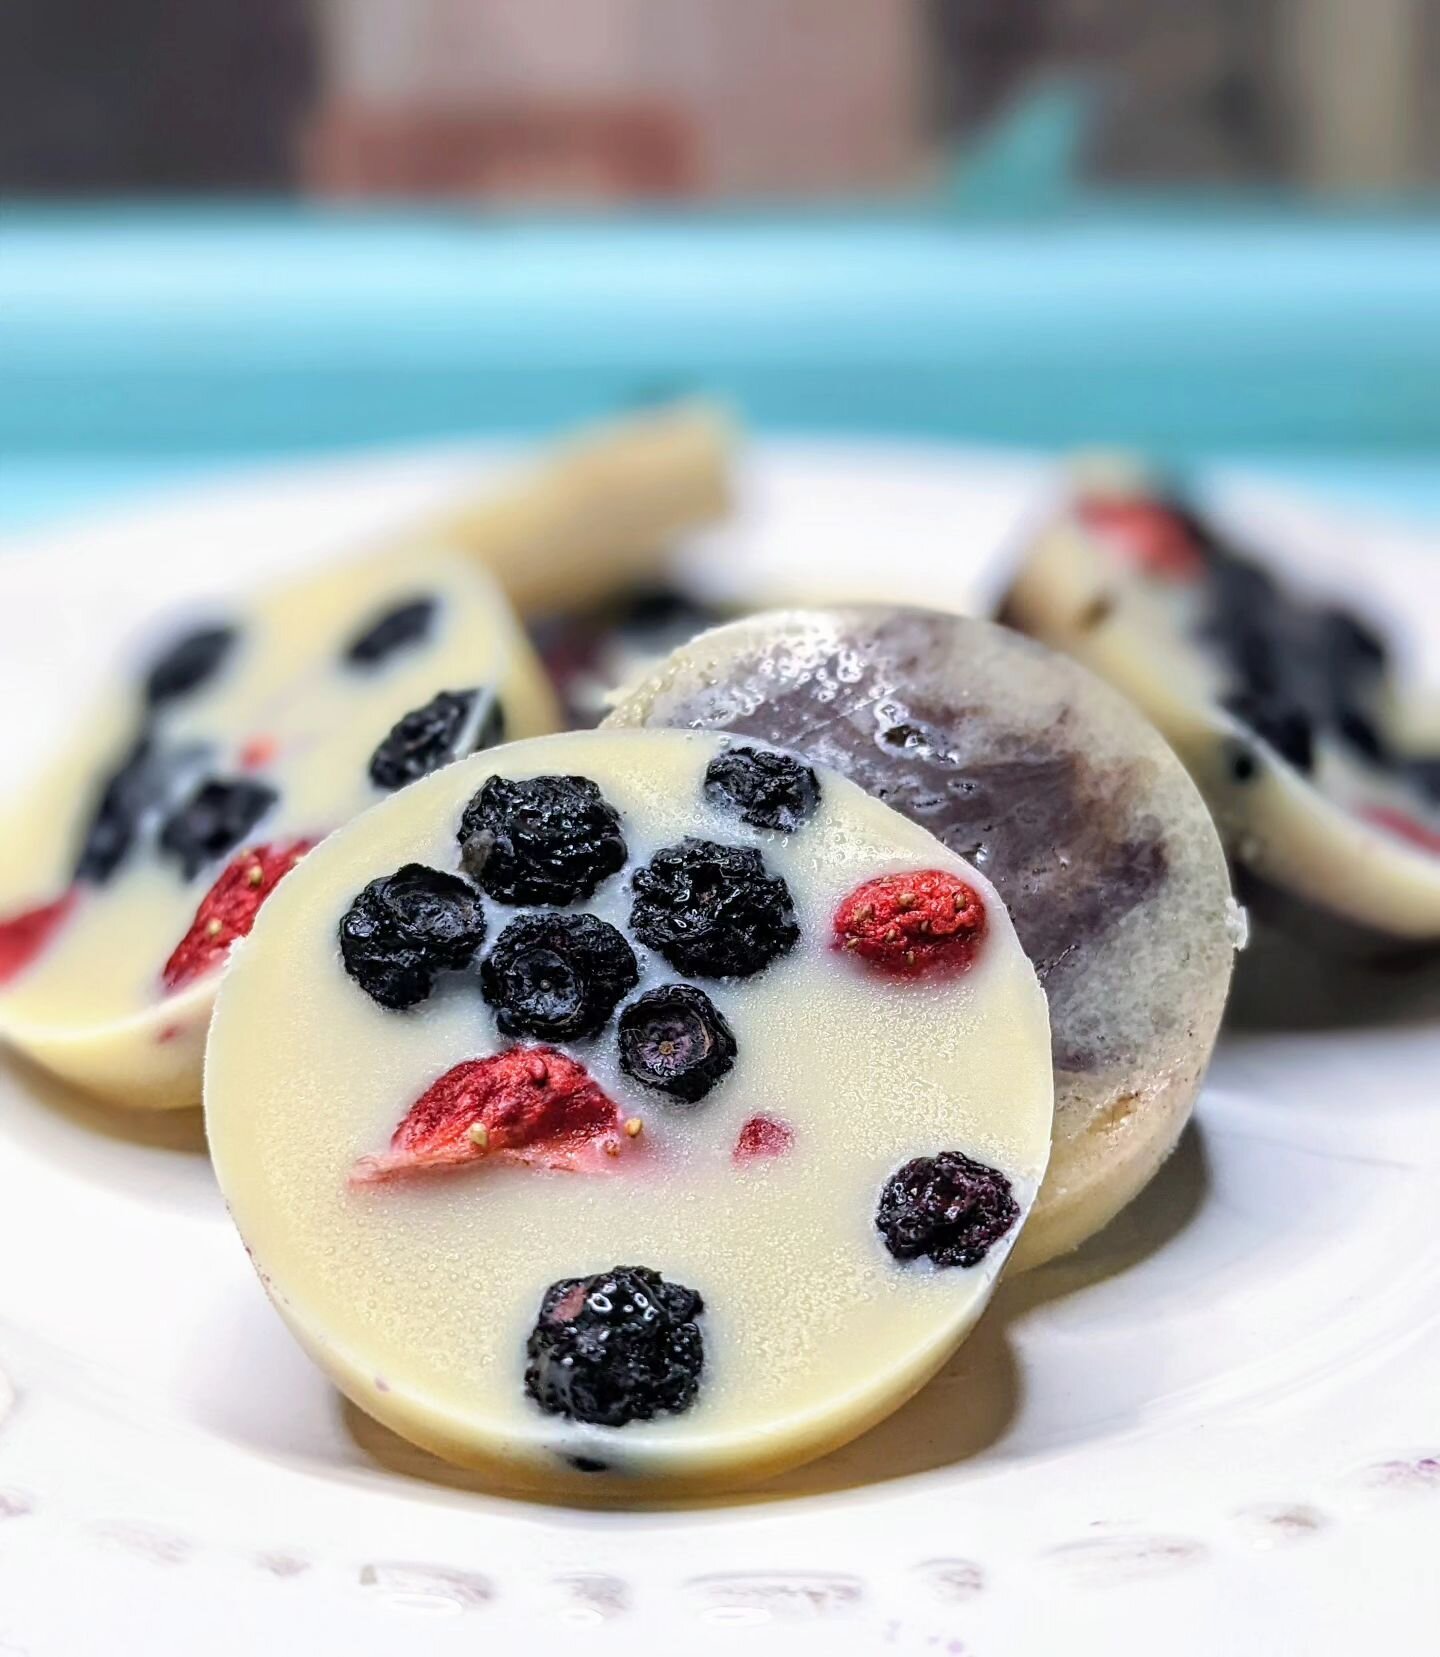 These White Chocolate Medallions are the (fat) bomb!😉

Corny jokes aside.... These are free from corn &amp; so much more.

This delicious treat is nutrient dense &amp; full of flavor as well as healthy fats. 

My IBD kiddo started requesting these c